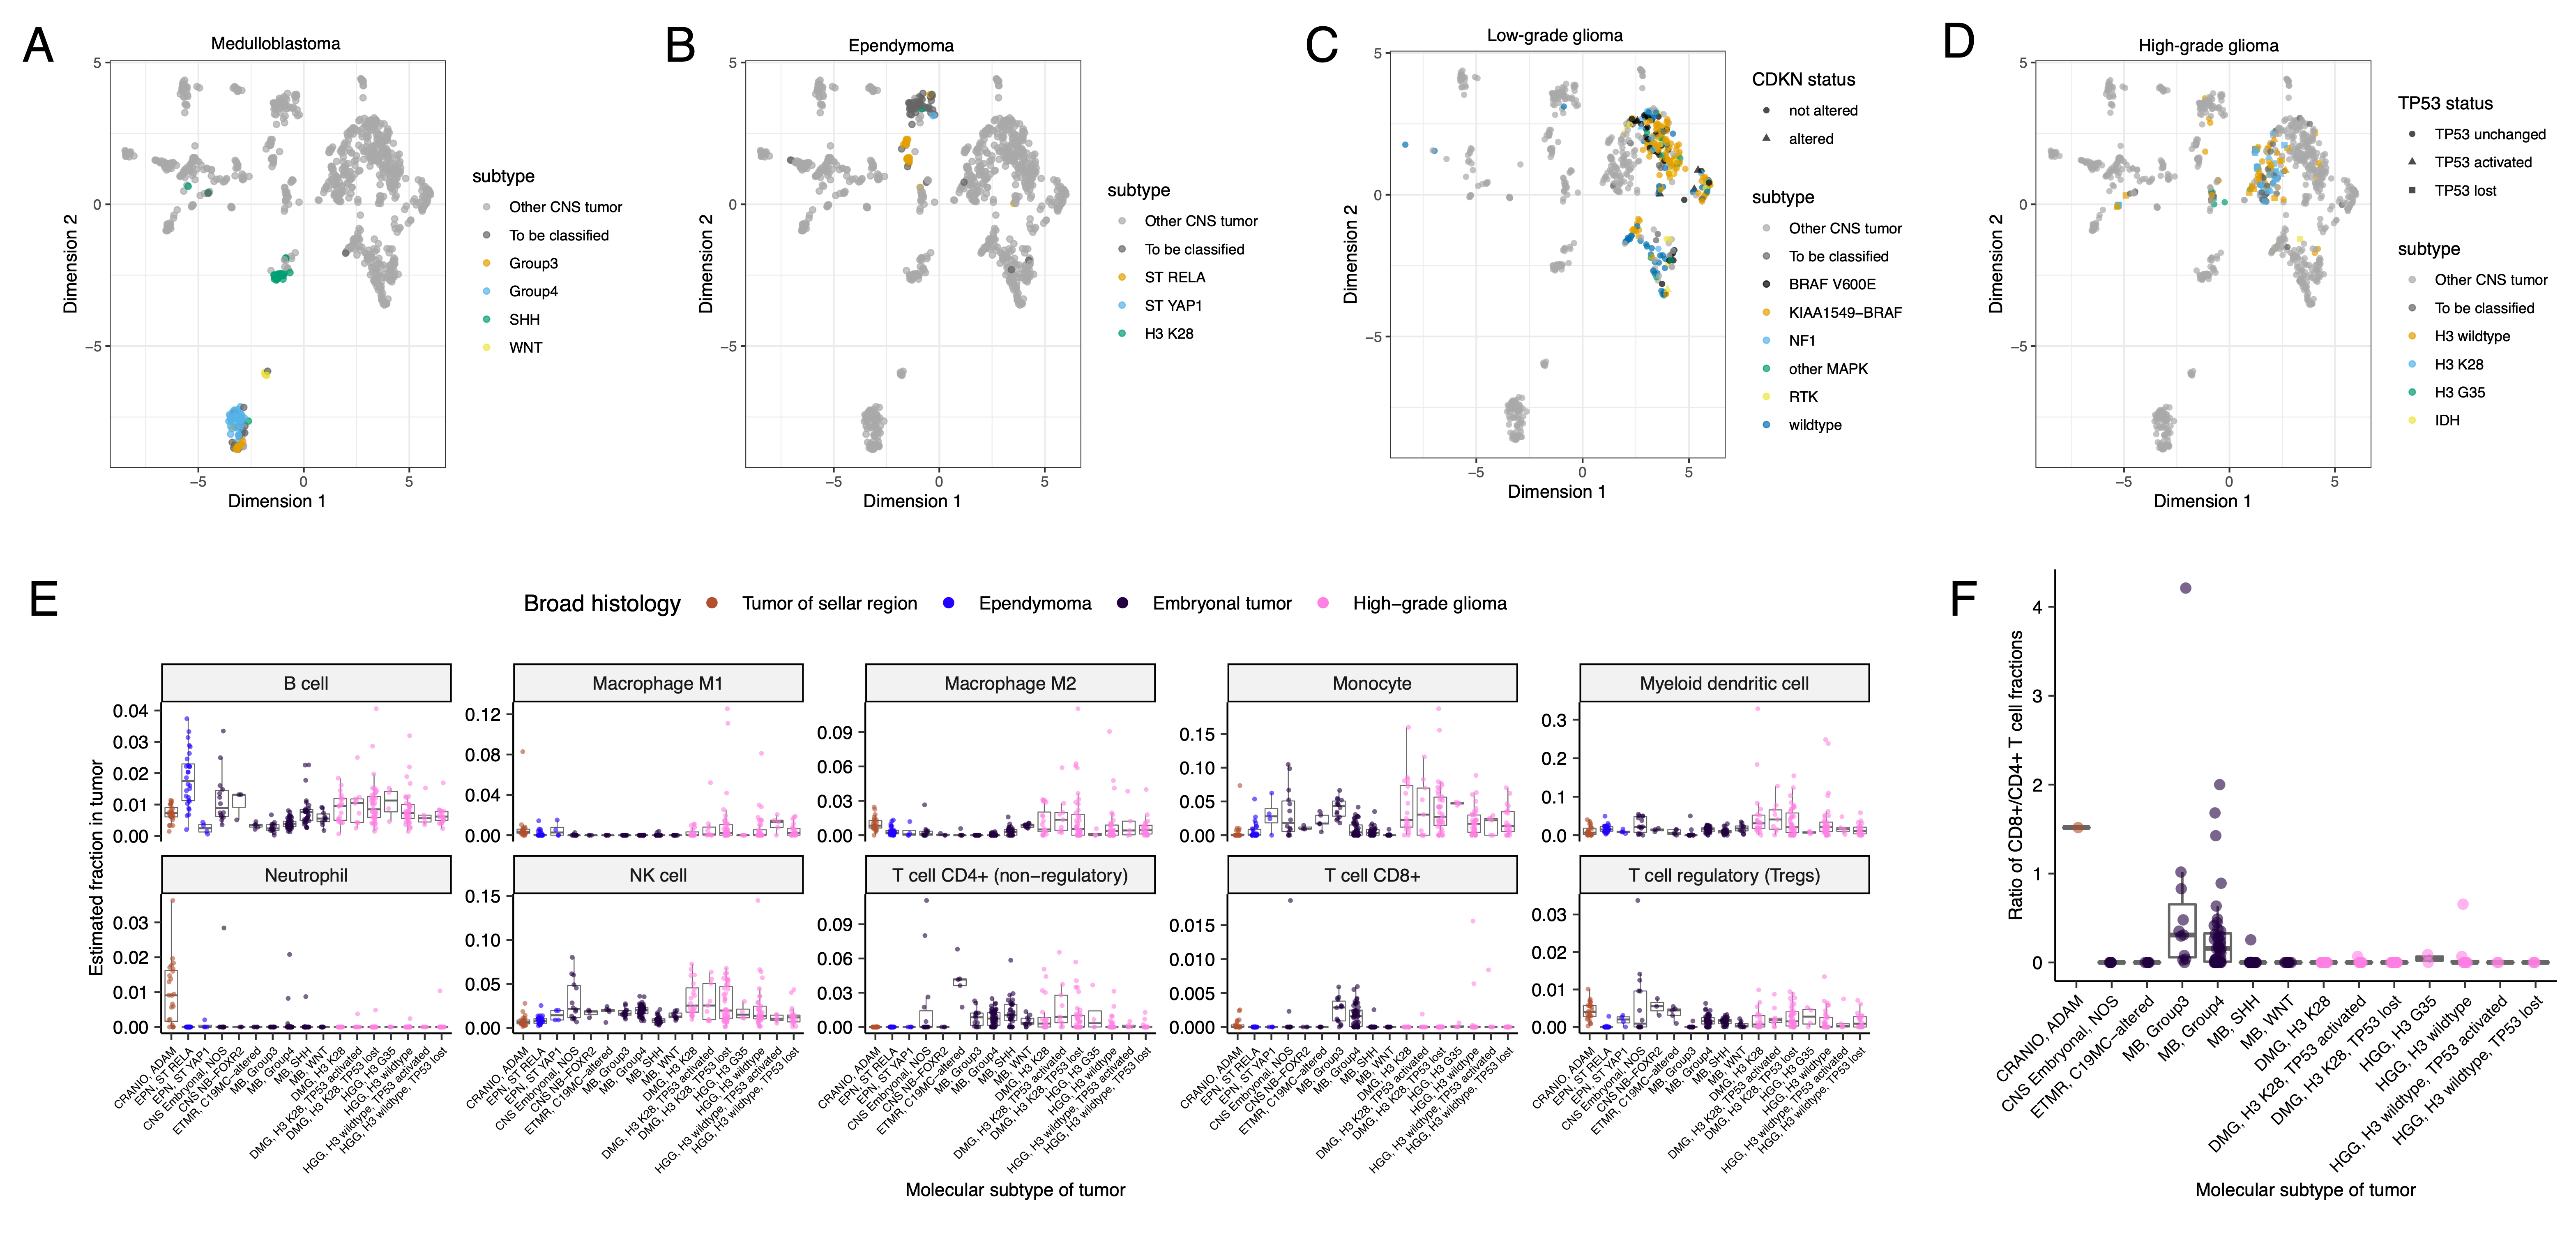 Figure S6: Subtype-specific clustering and immune cell fractions, Related to Figure 5. First two dimensions from UMAP of sample transcriptome data with points colored by molecular_subtype for medulloblastoma (A), ependymoma (B), low-grade glioma (C), and high-grade glioma (D). (E) Box plots of quanTIseq estimates of immune cell fractions in histologies with more than one molecular subtype with N >=3. (F) Box plots of the ratio of immune cell fractions of CD8+ to CD4+ T cells in histologies with more than one molecular subtype with N >=3. Box plot represents 5% (lower whisker), 25% (lower box), 50% (median), 75% (upper box), and 95% (upper whisker) quantiles.